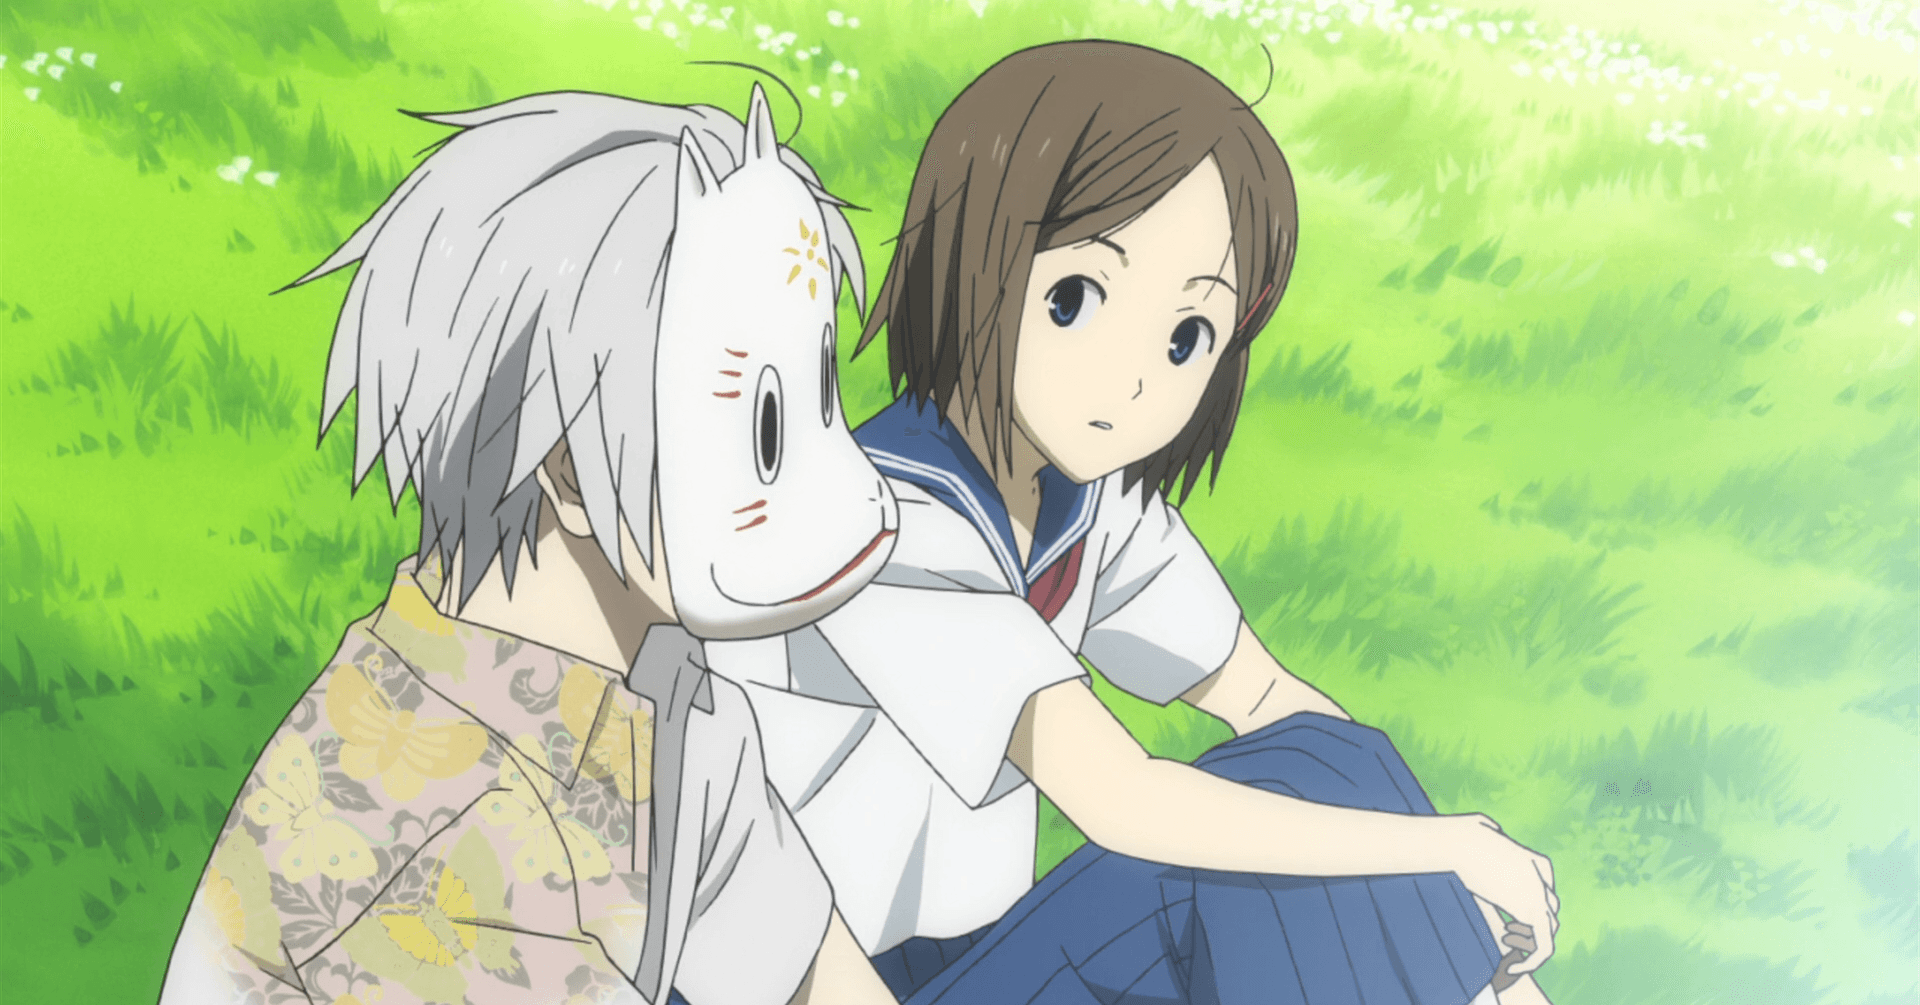 The 16 Best Supernatural Romance Anime (Recommendations 2019)